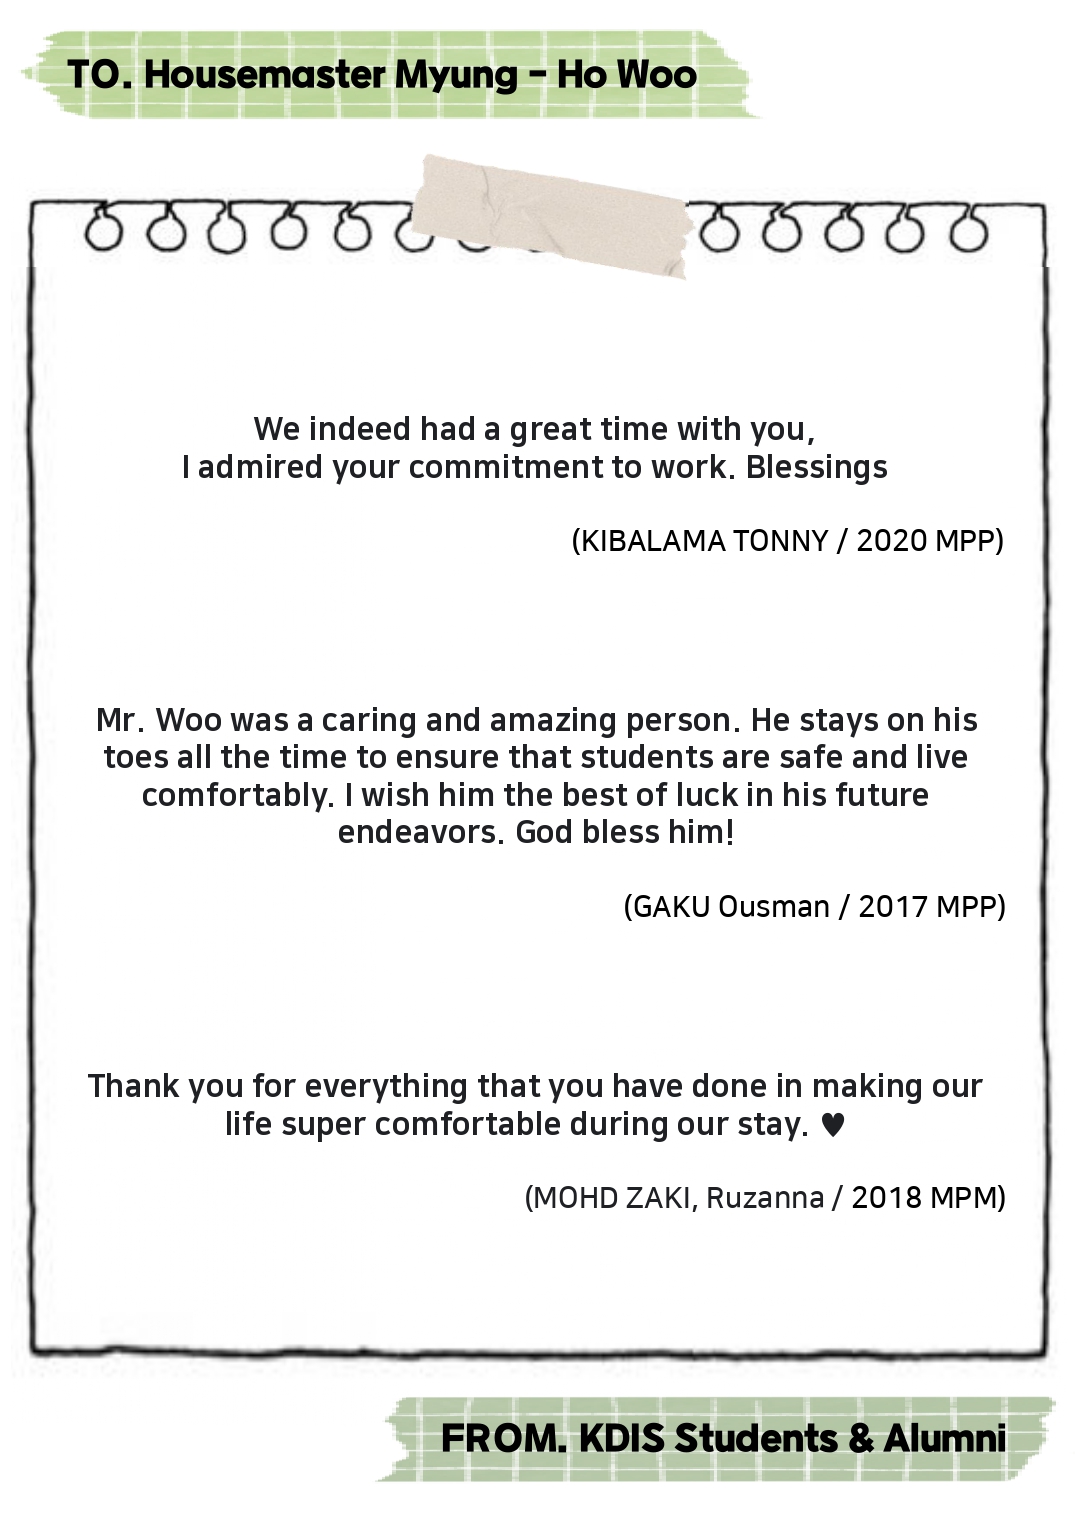 Thank you Housemaster Myung-ho Woo -Messages from KDIS Students and Alumni 사진21